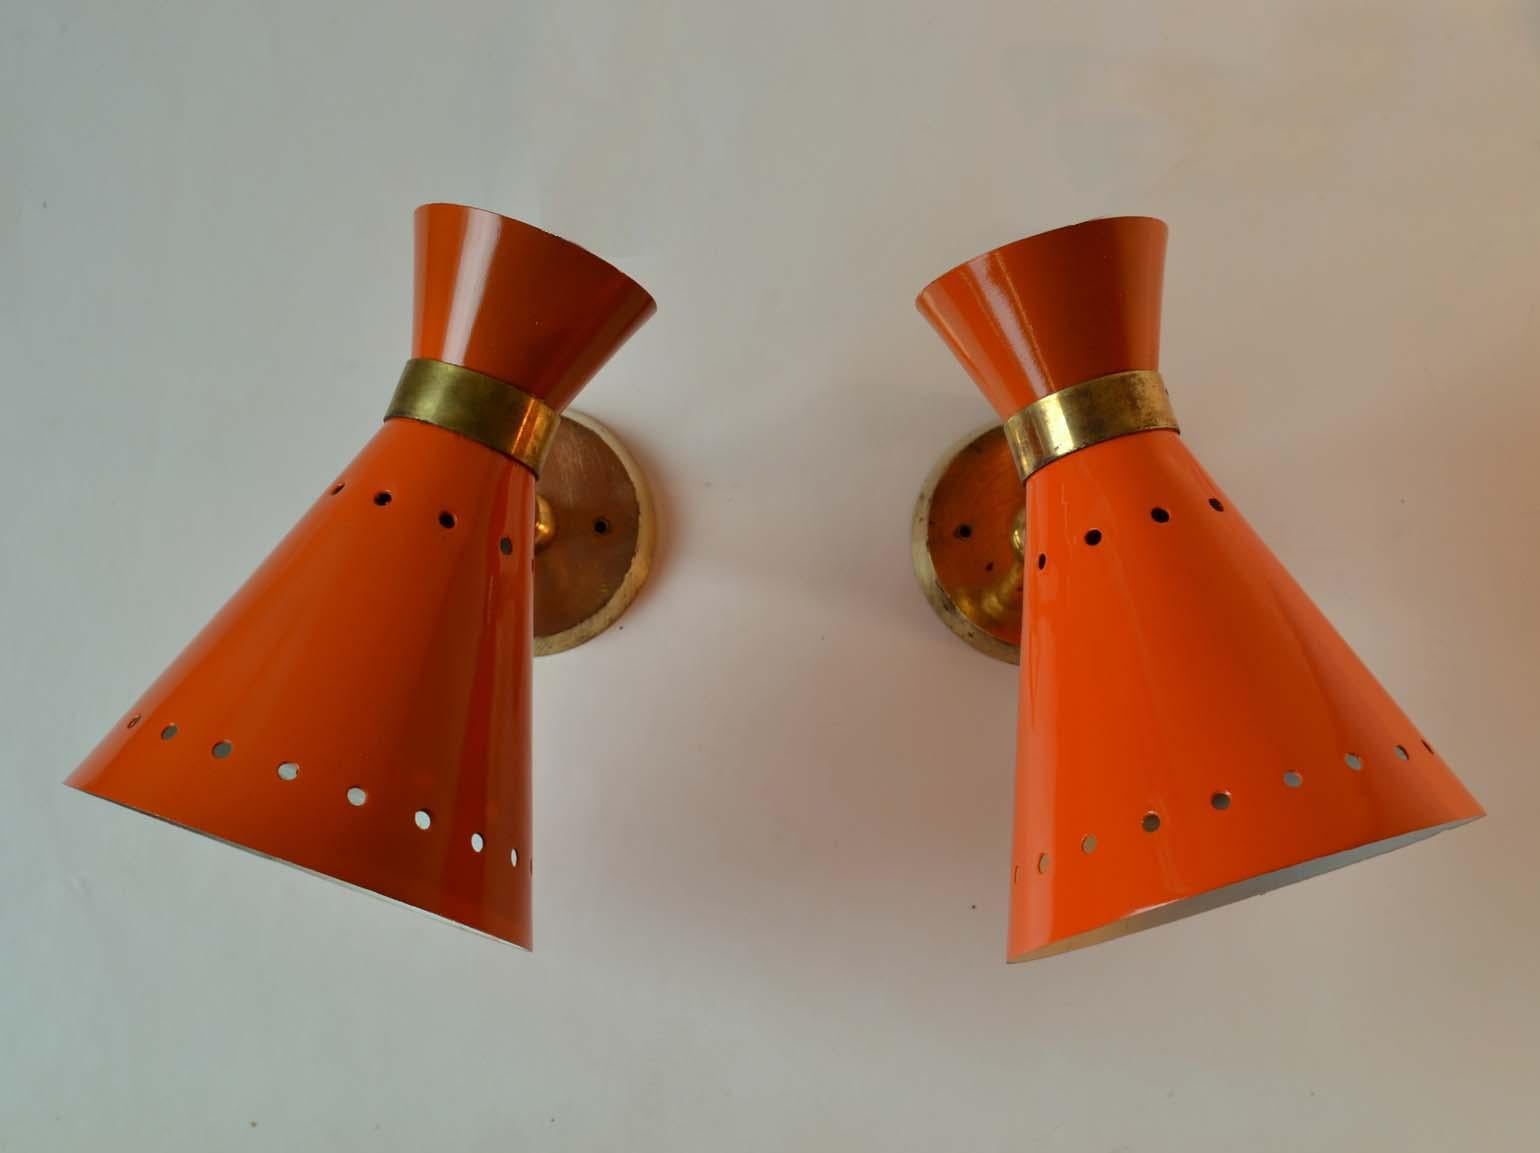 Pair of original Mid-Century Modern Italian orange enameled aluminum and brass hourglass shape sconces with adjustable joints to angle the light source. These Italian enameled sconces attributed to Stilnovo were produced in the 1950s-1960s and are